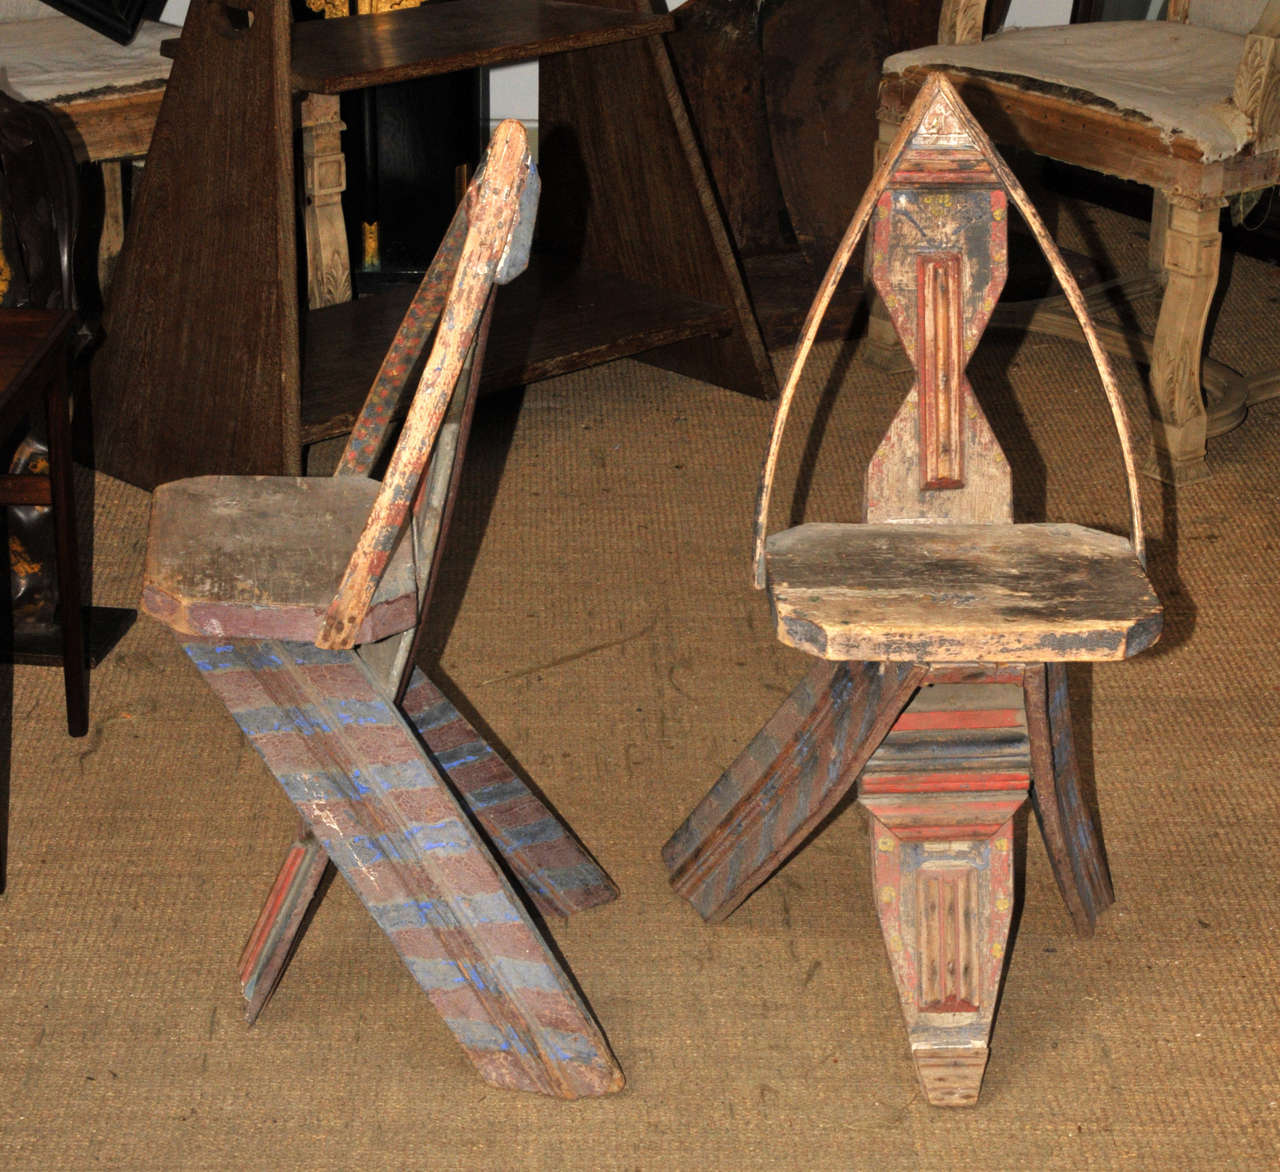 Pair of rare 19th Century Russian chairs in painted wood. Folk art. Good condition. Normal wear consistent with age and use.